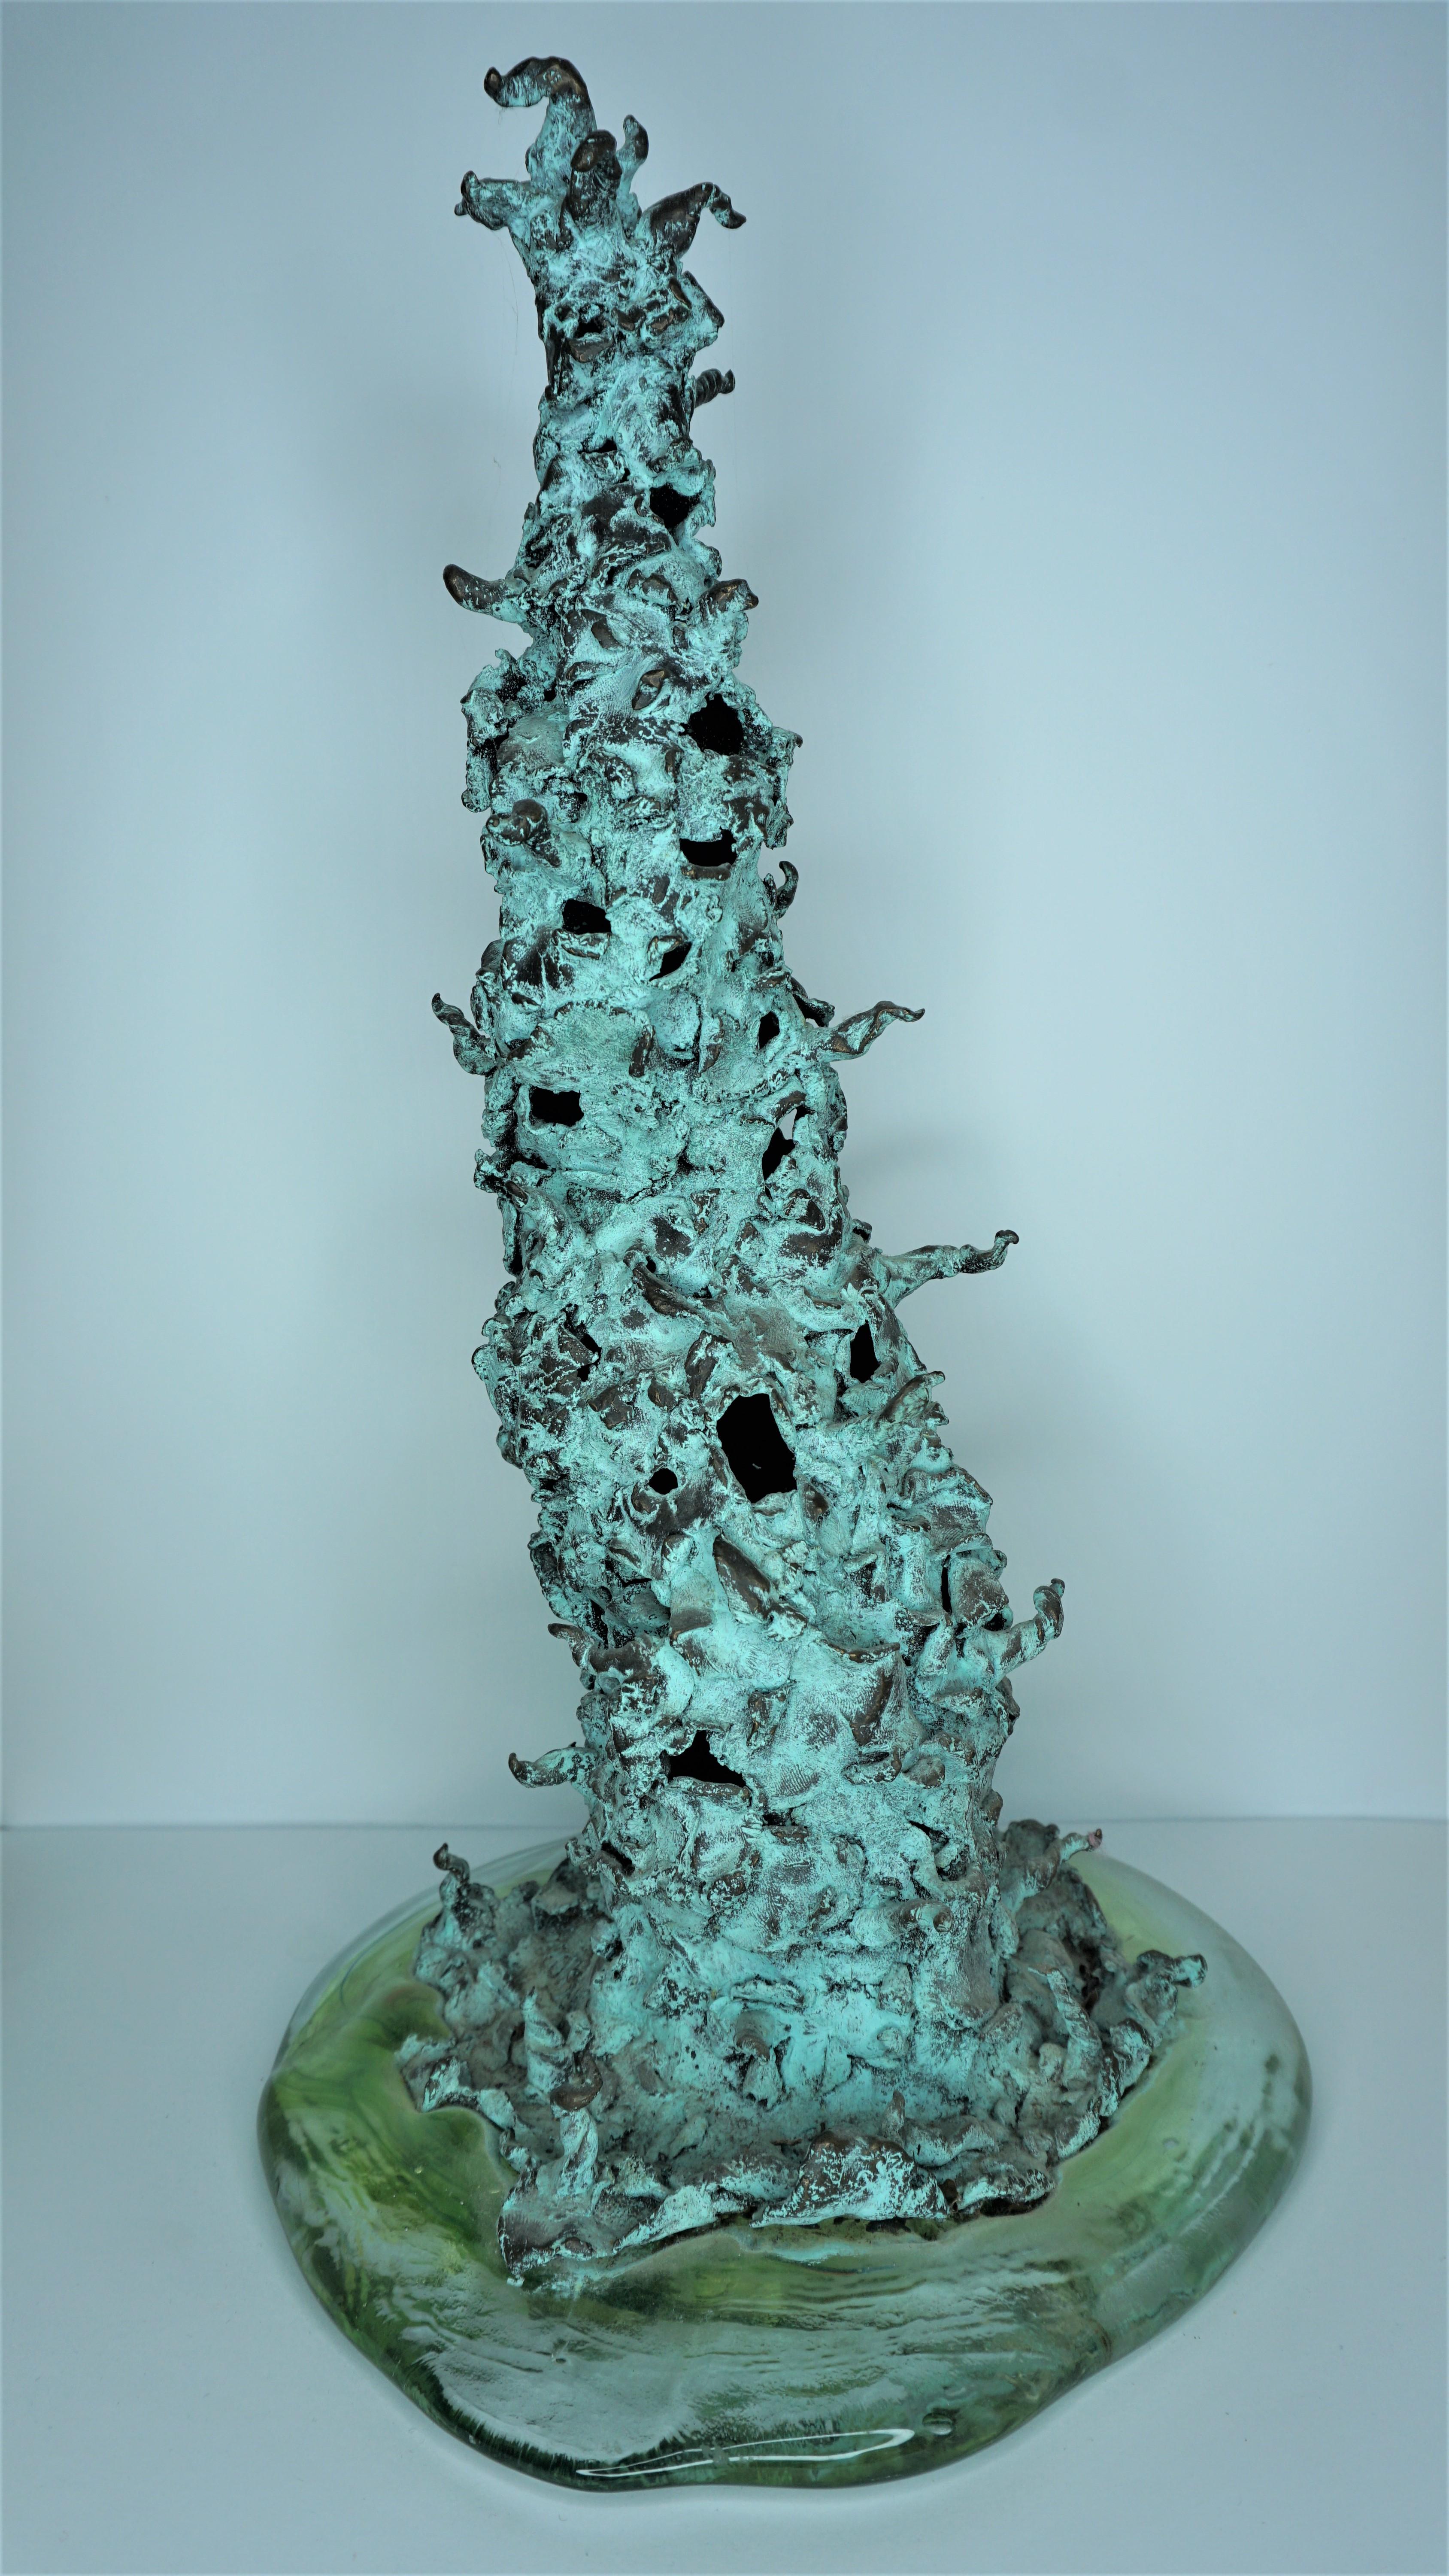 Victor Prodanchuk Abstract Sculpture - Tower